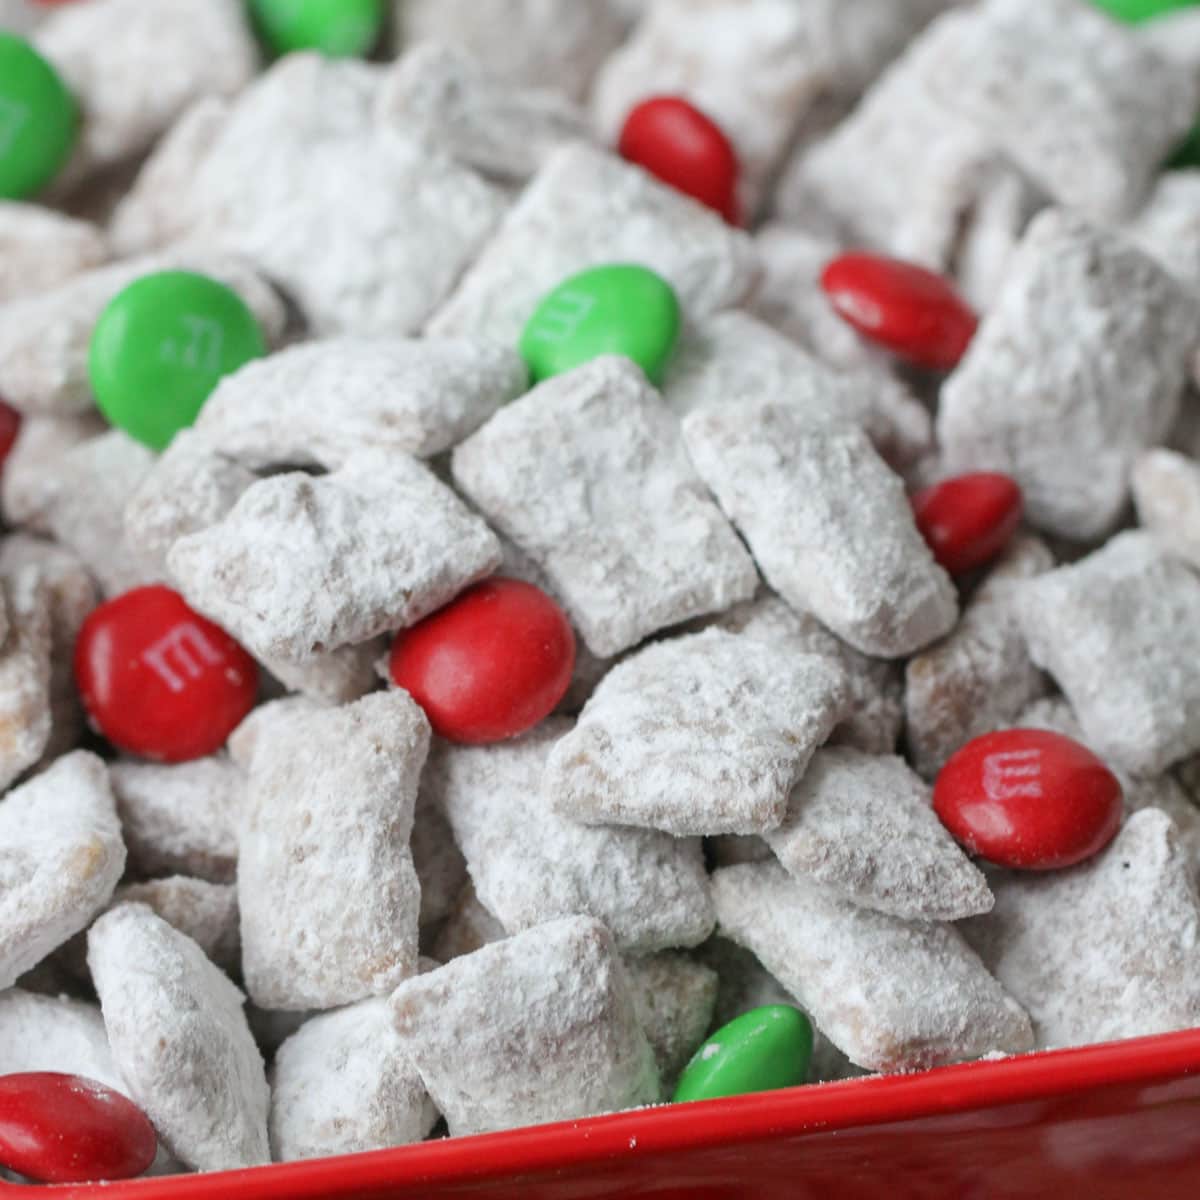 Christmas puppy chow tossed with holiday M&Ms in a red bowl